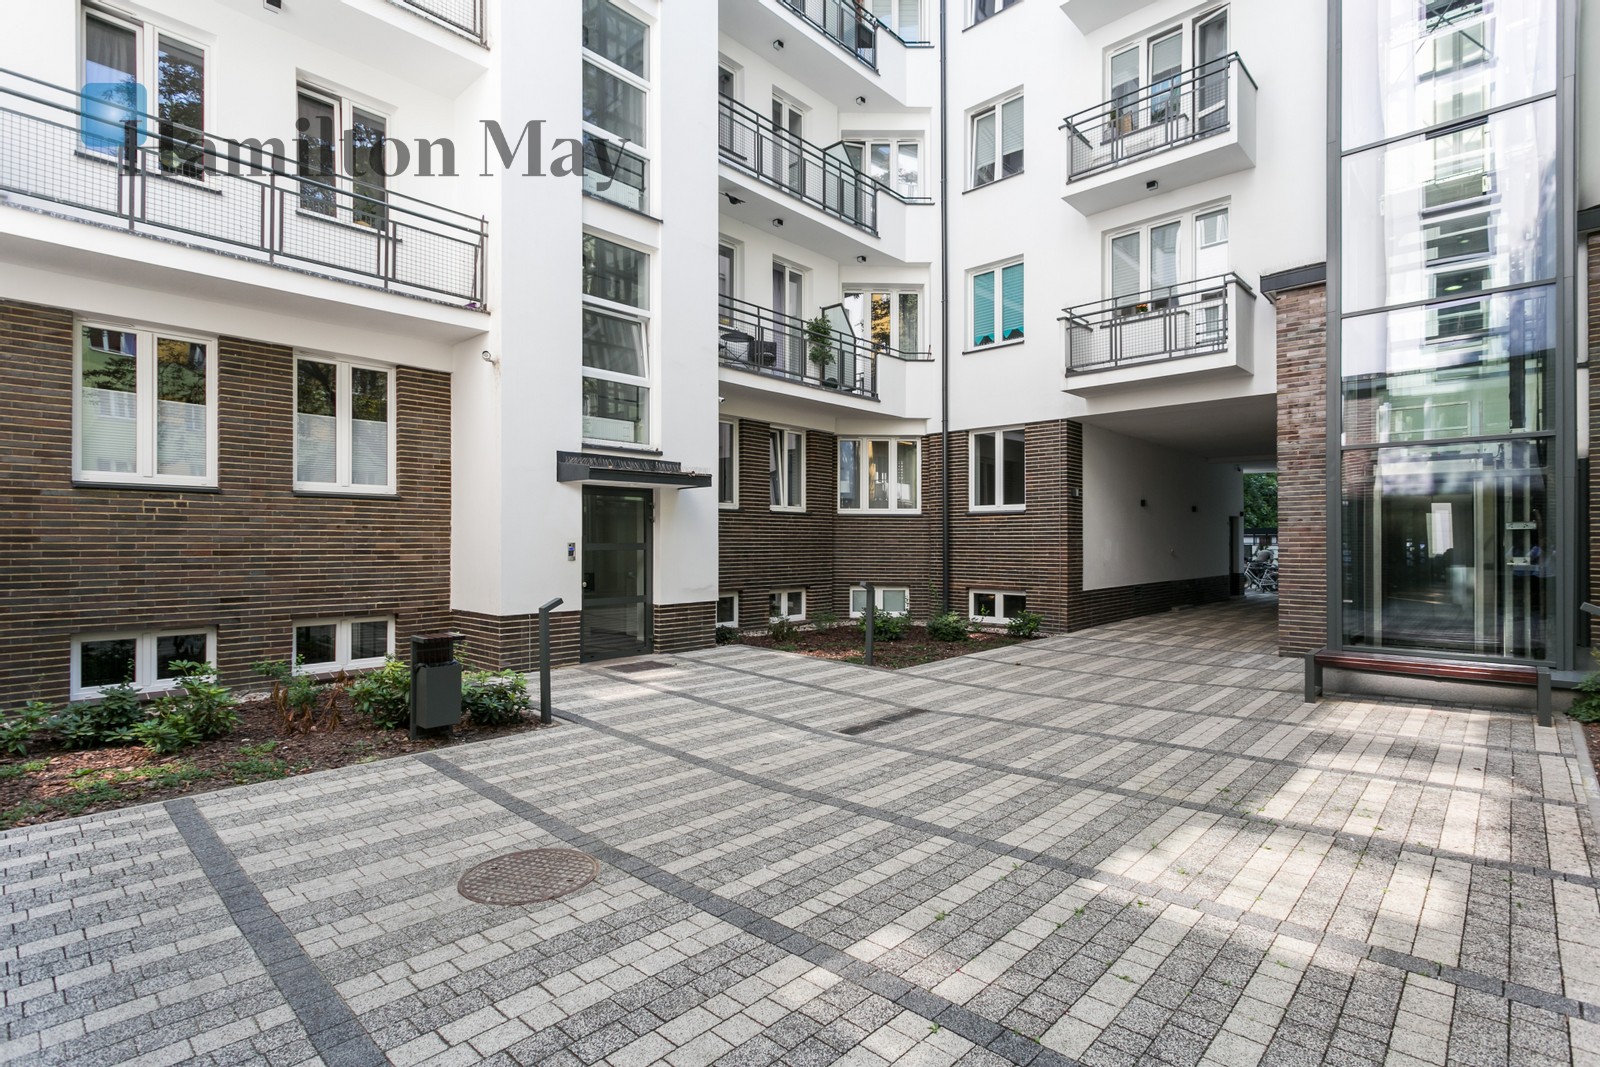 Level: 5 Status: existing Number of units: 62 Sale price from: 340000PLN Avg. sales price/m2: 10000PLN Rental price from: nullPLN - slider